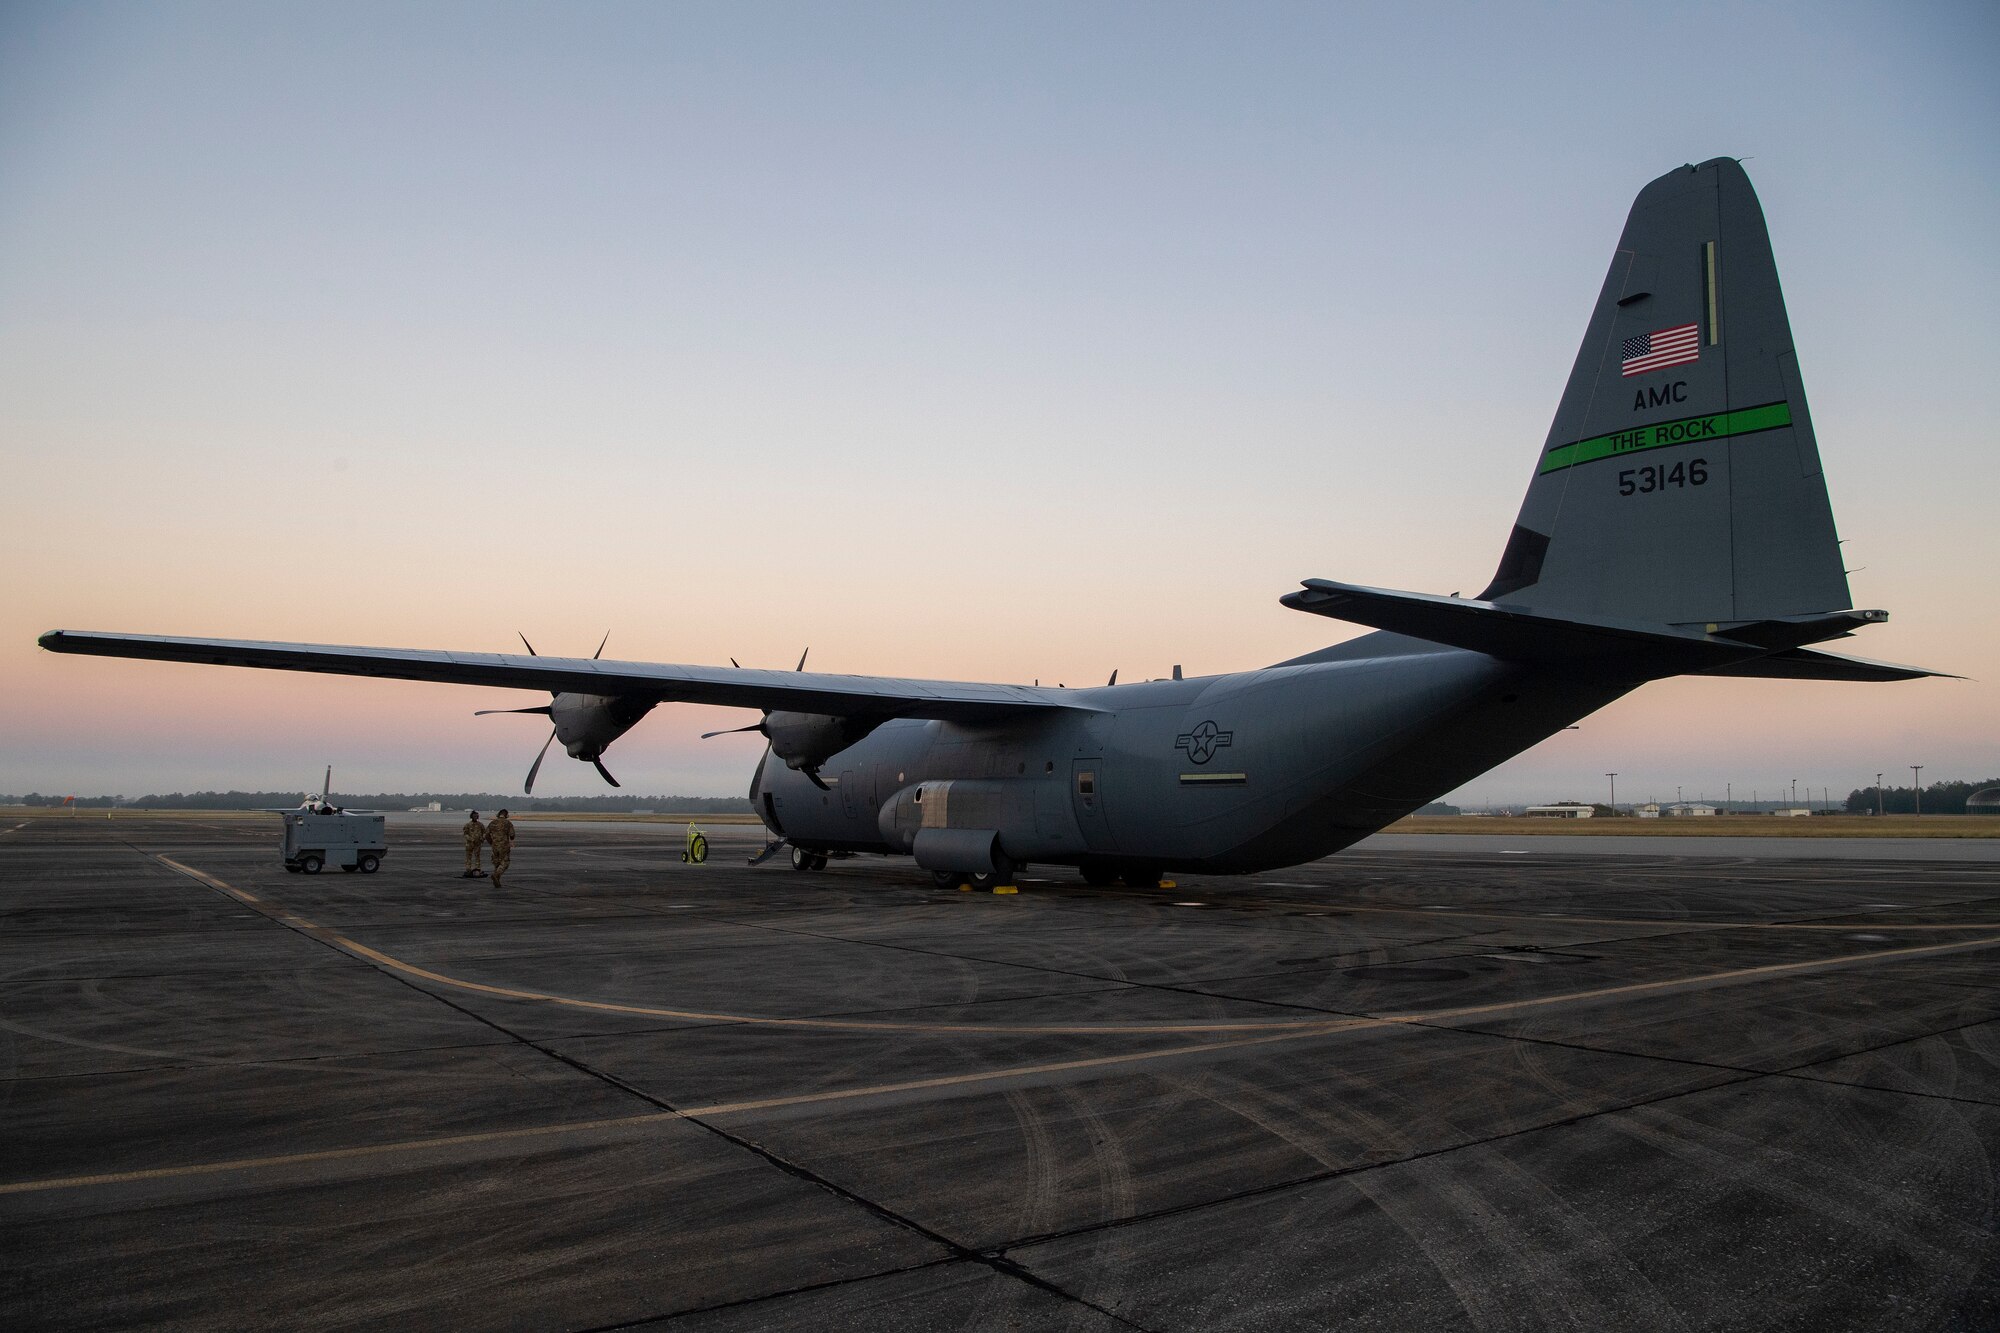 A C-130J sits on the runway at sunrise.